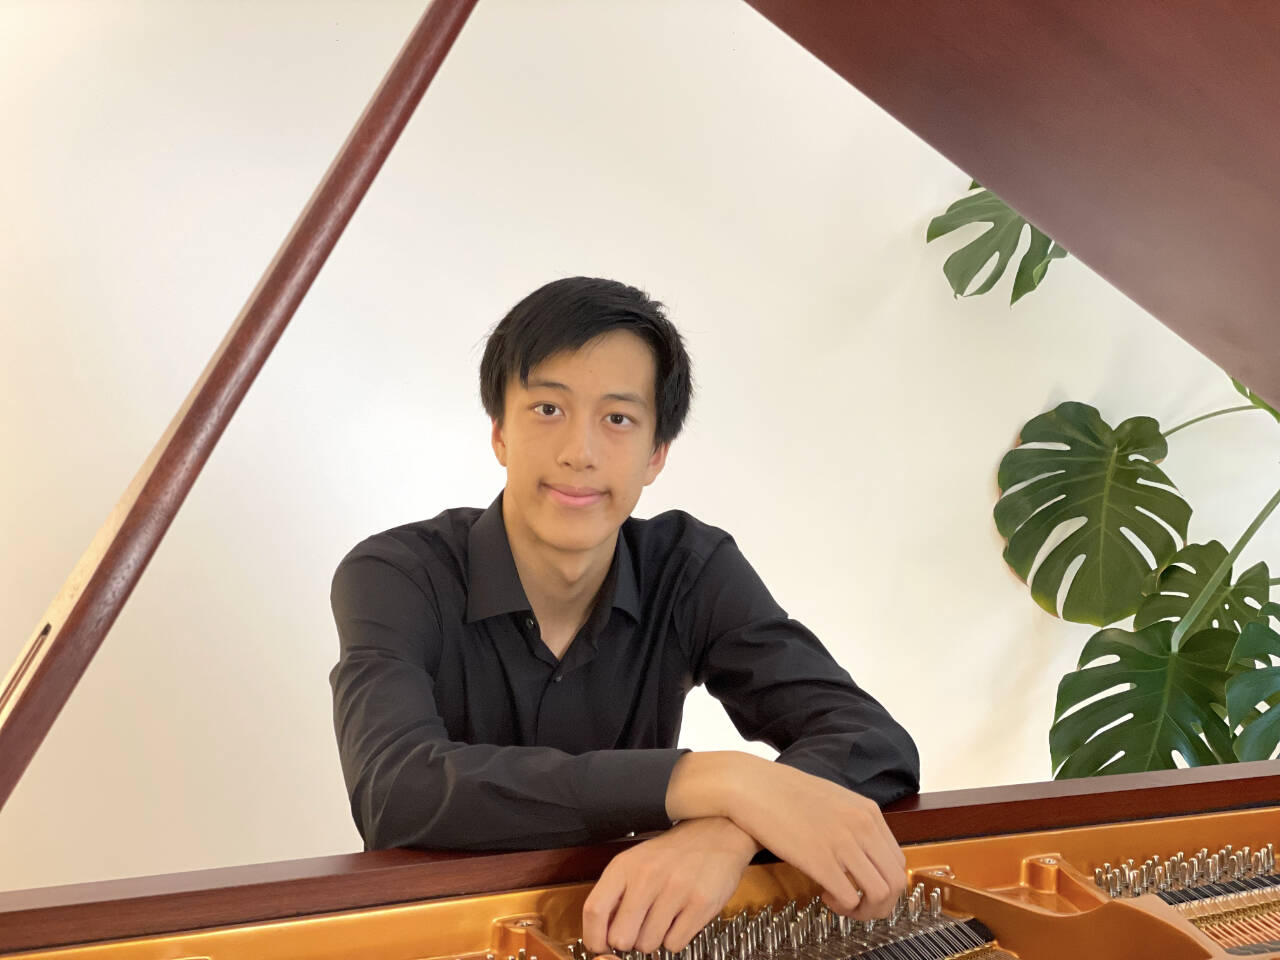 Photo courtesy of Leo Yang
Leo Yang, a national award-winning pianist, will take the stage for a concert at the Field Arts & Events Hall in Port Angeles on Saturday, April 13.